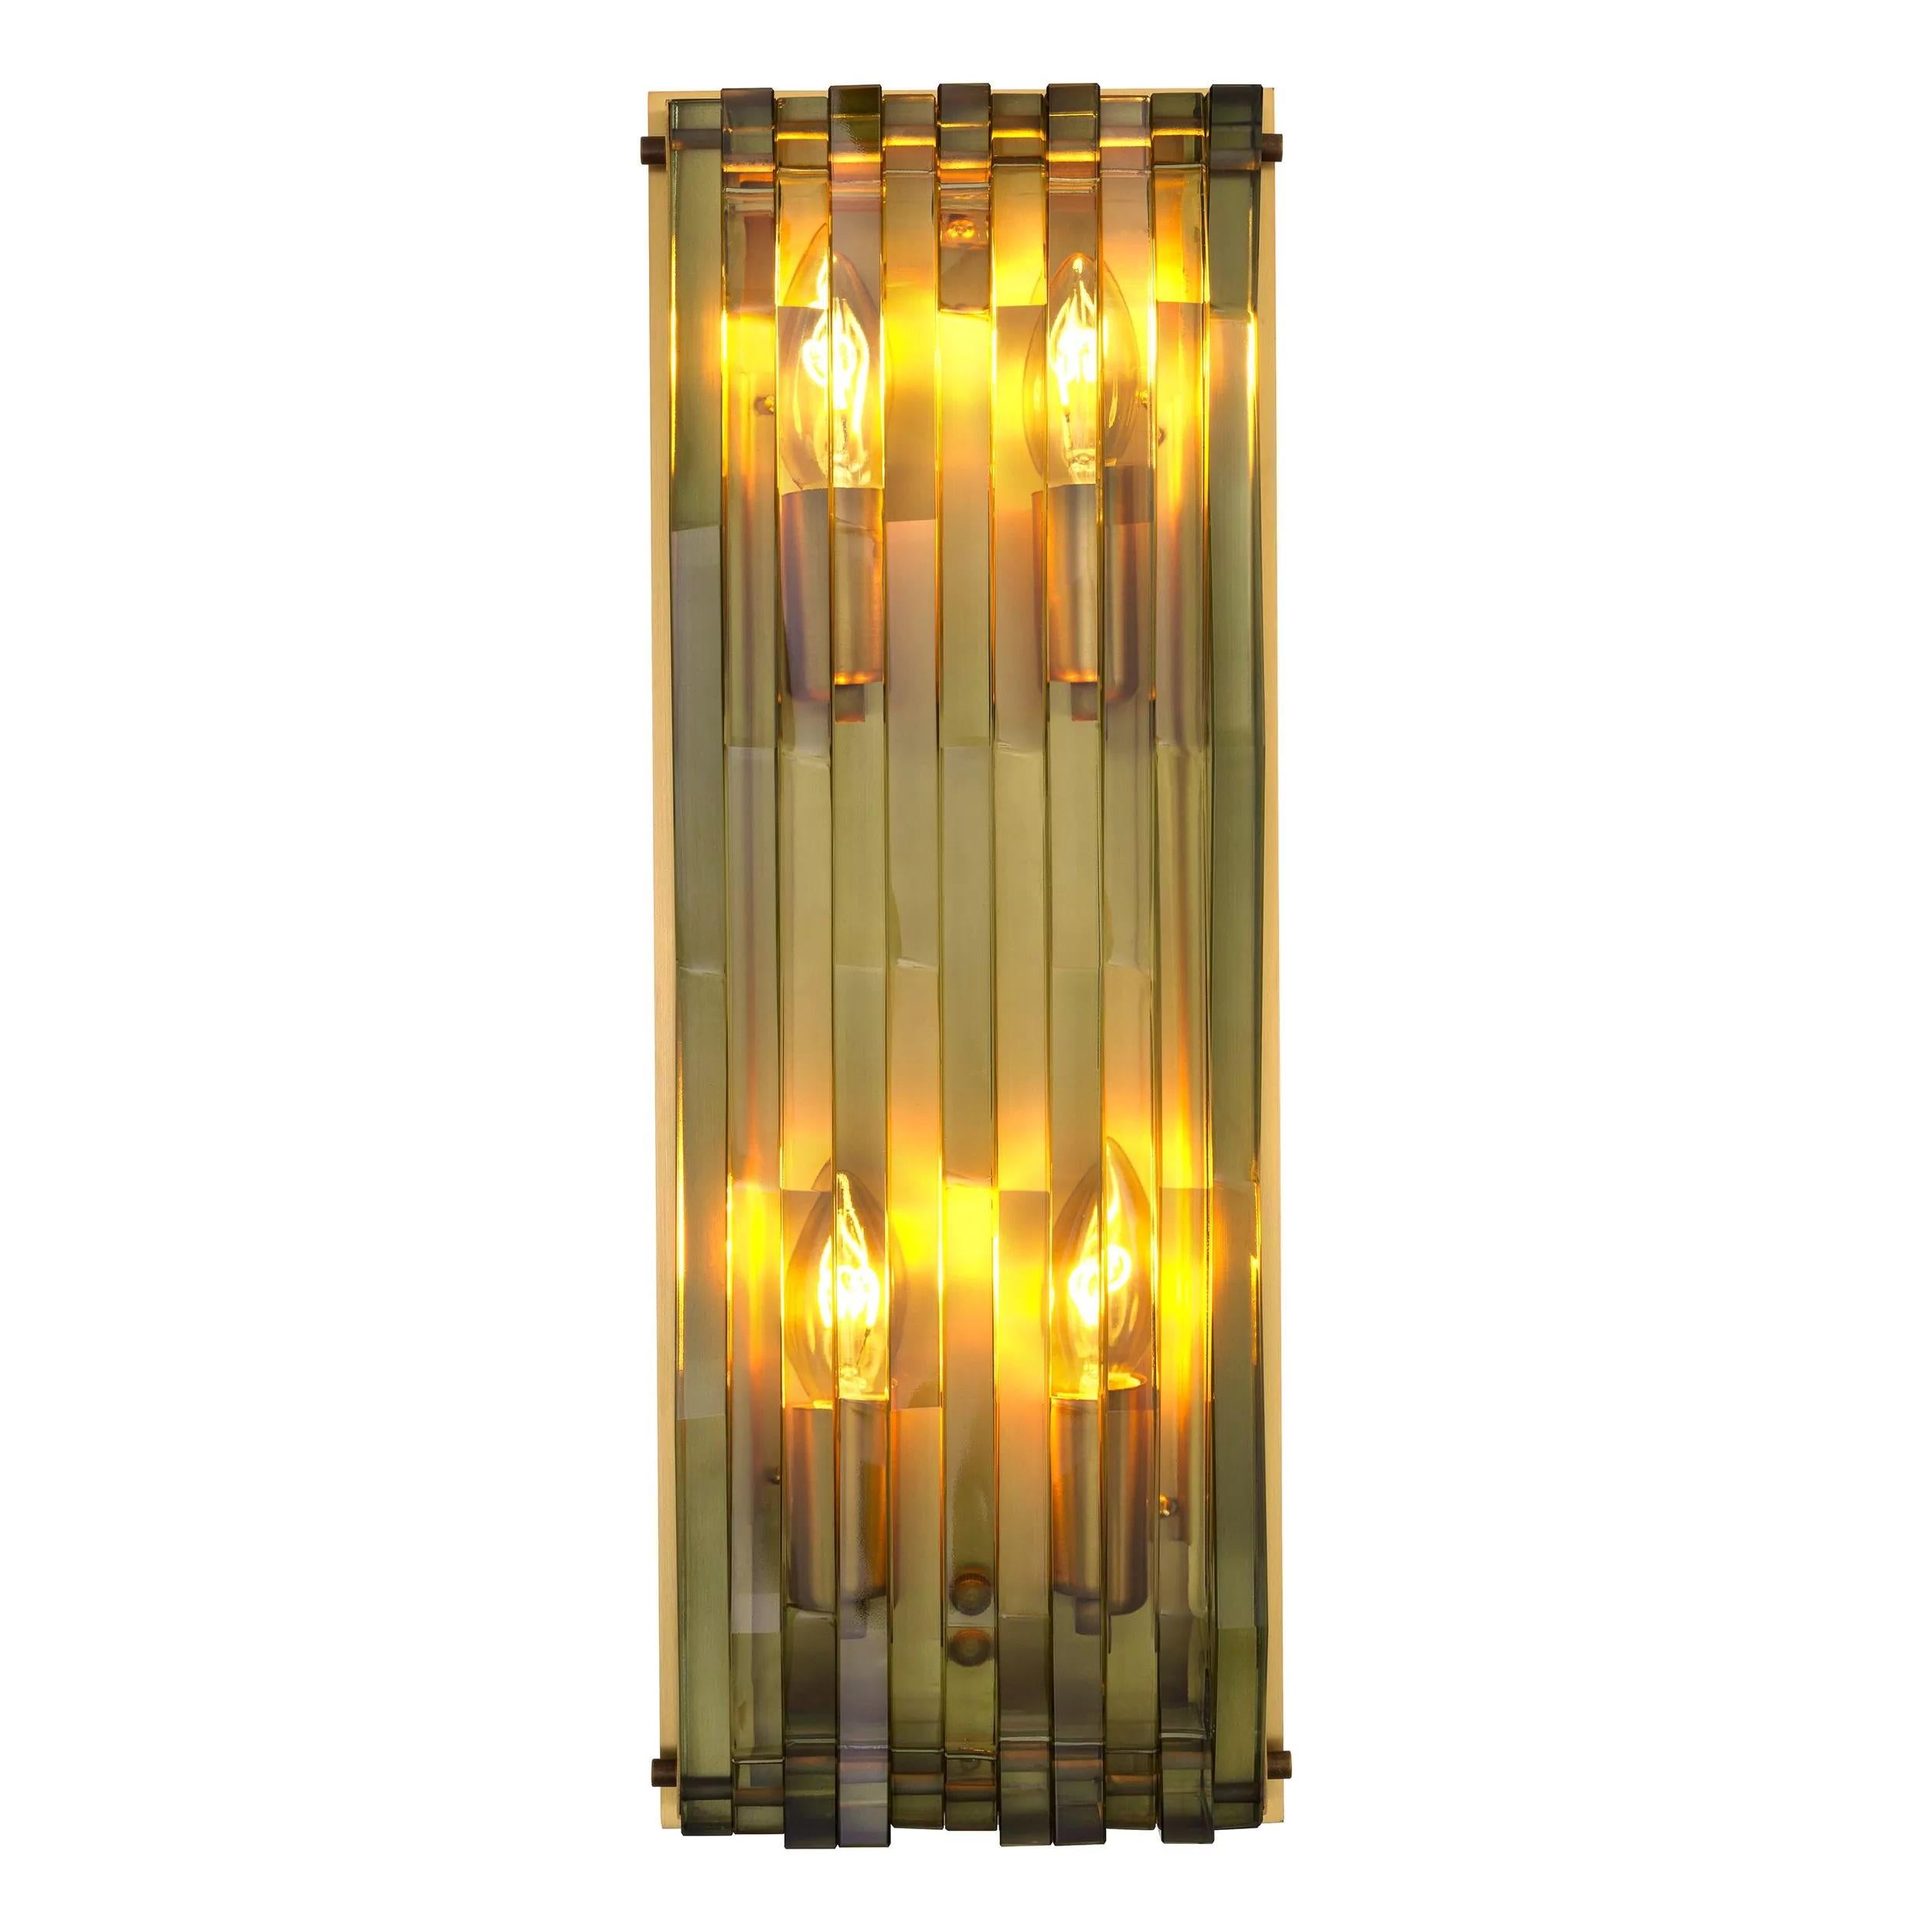 Unknown 1960s-1970s Italian Design And Brutalist Style Brass and Glass Wall Light For Sale